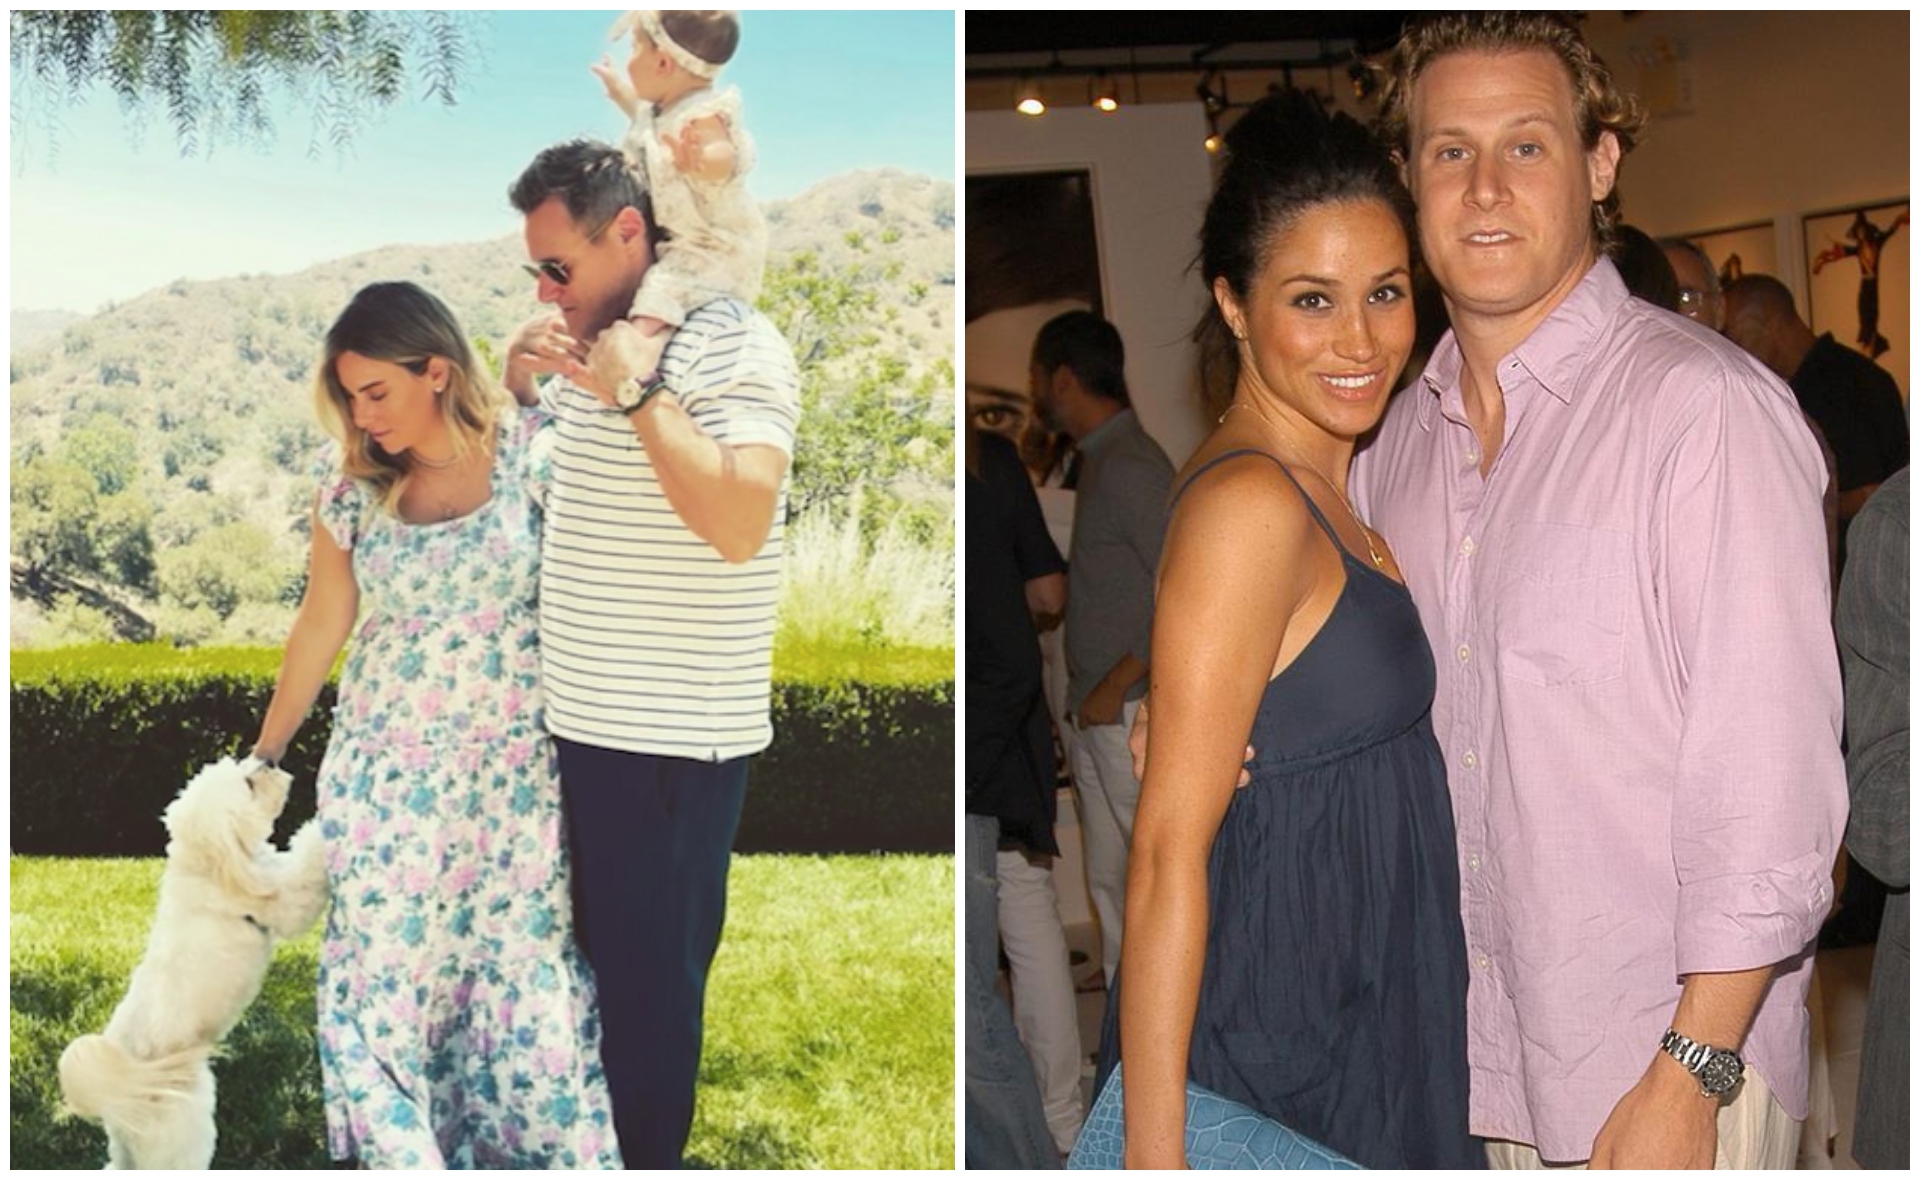 Meghan Markle’s ex-husband Trevor Engelson is expecting a second baby with his wife, Tracey